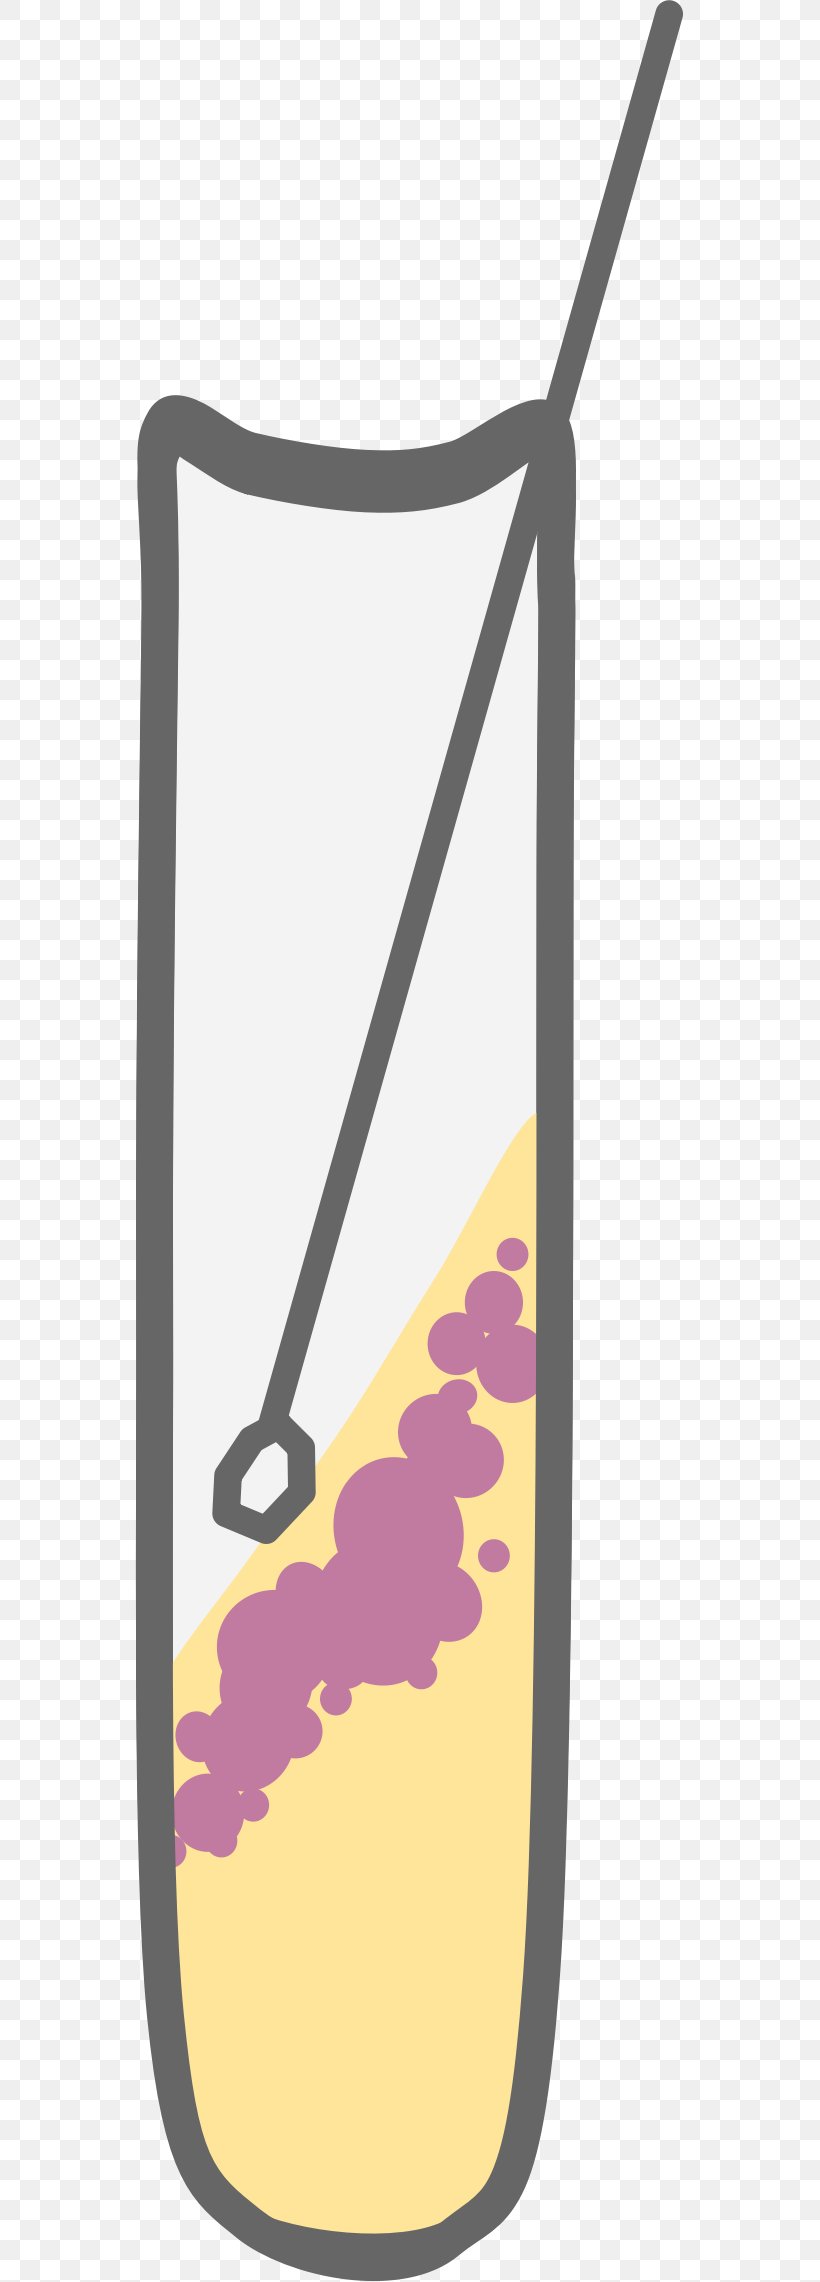 Microbiological Culture Bacteria Test Tubes Clip Art, PNG, 549x2282px, Microbiological Culture, Bacteria, Cell, Cell Culture, Culture Download Free